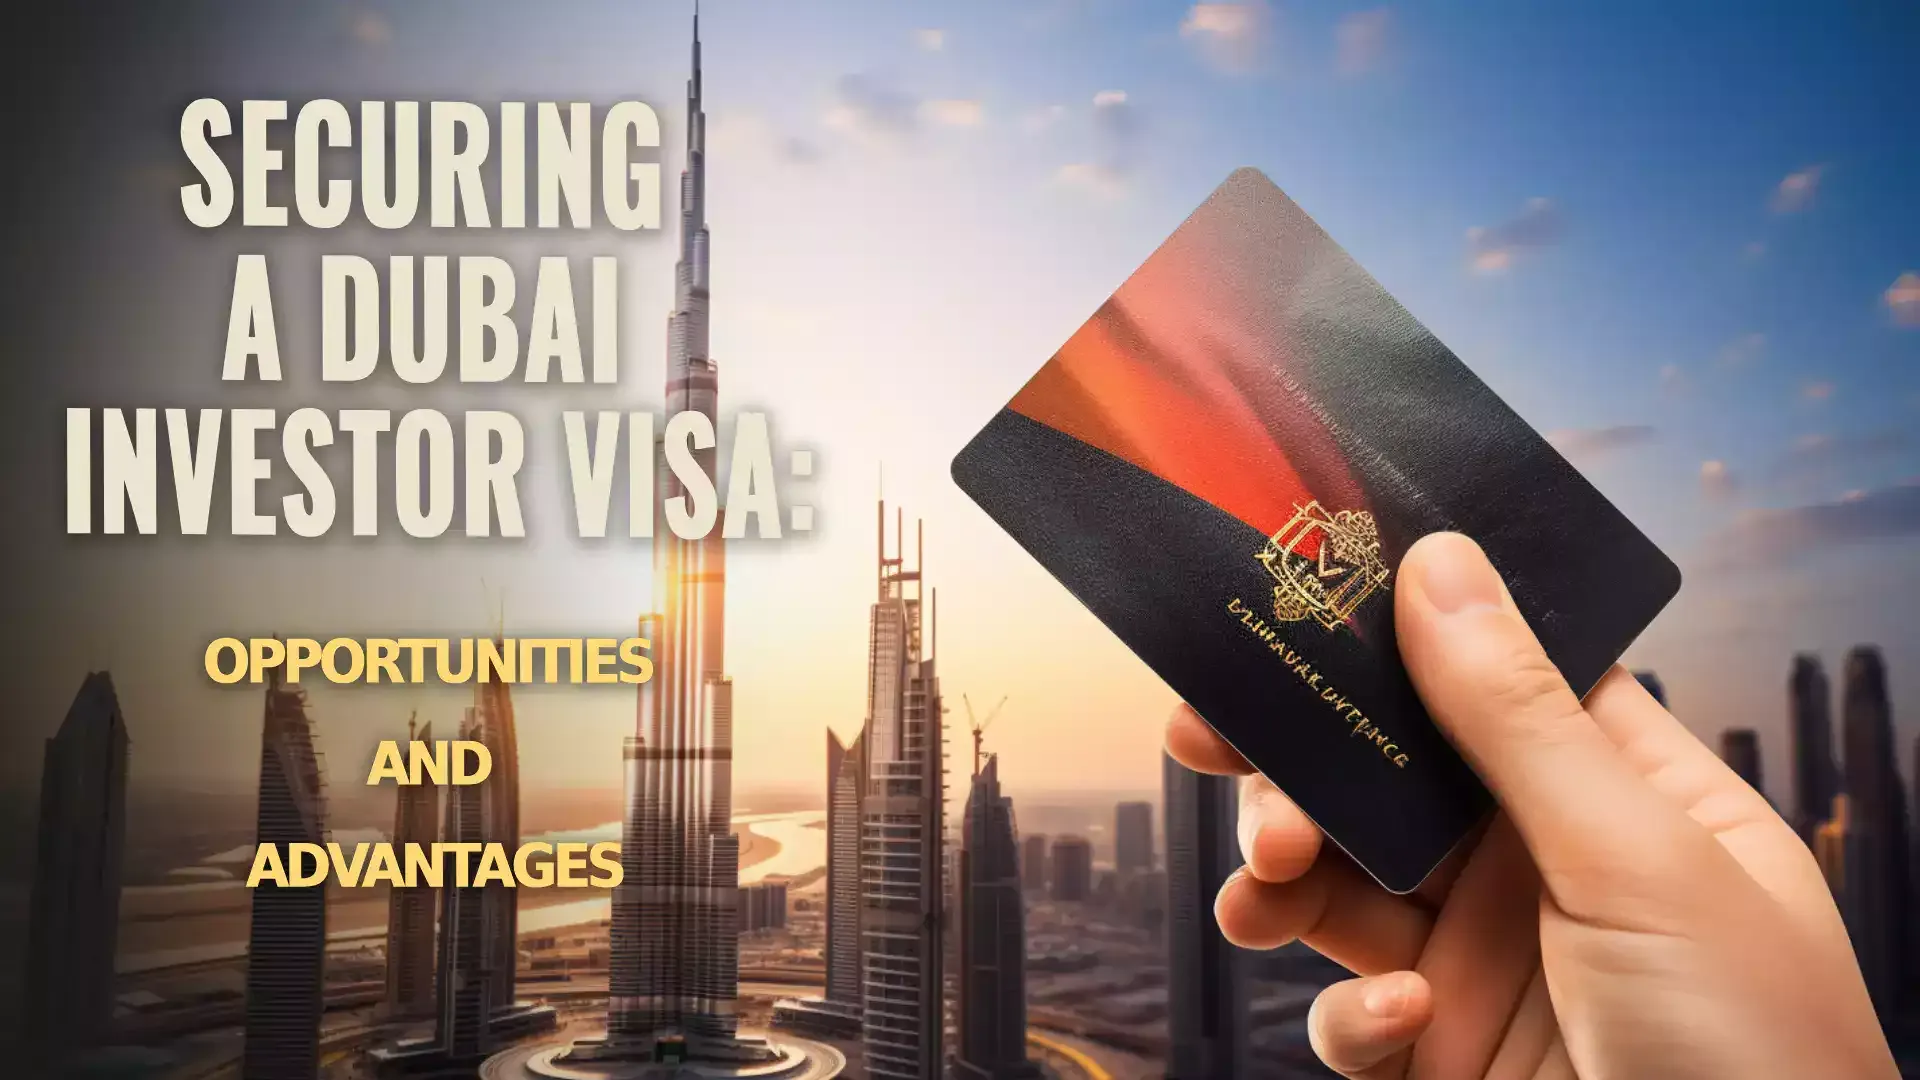 Image showing the Dubai skyline, representing the opportunities linked to the Dubai Investor Visa